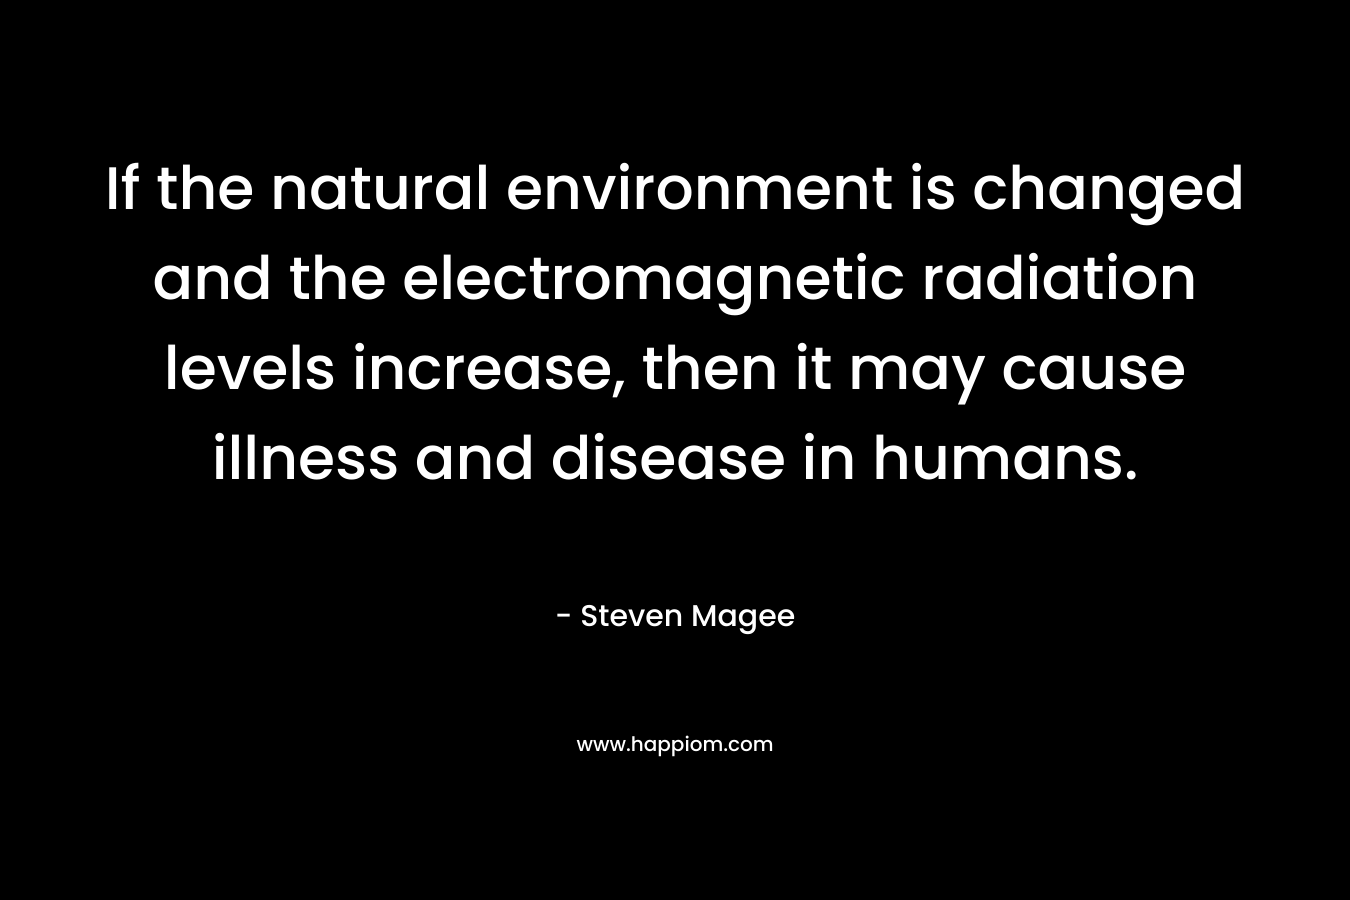 If the natural environment is changed and the electromagnetic radiation levels increase, then it may cause illness and disease in humans. – Steven Magee